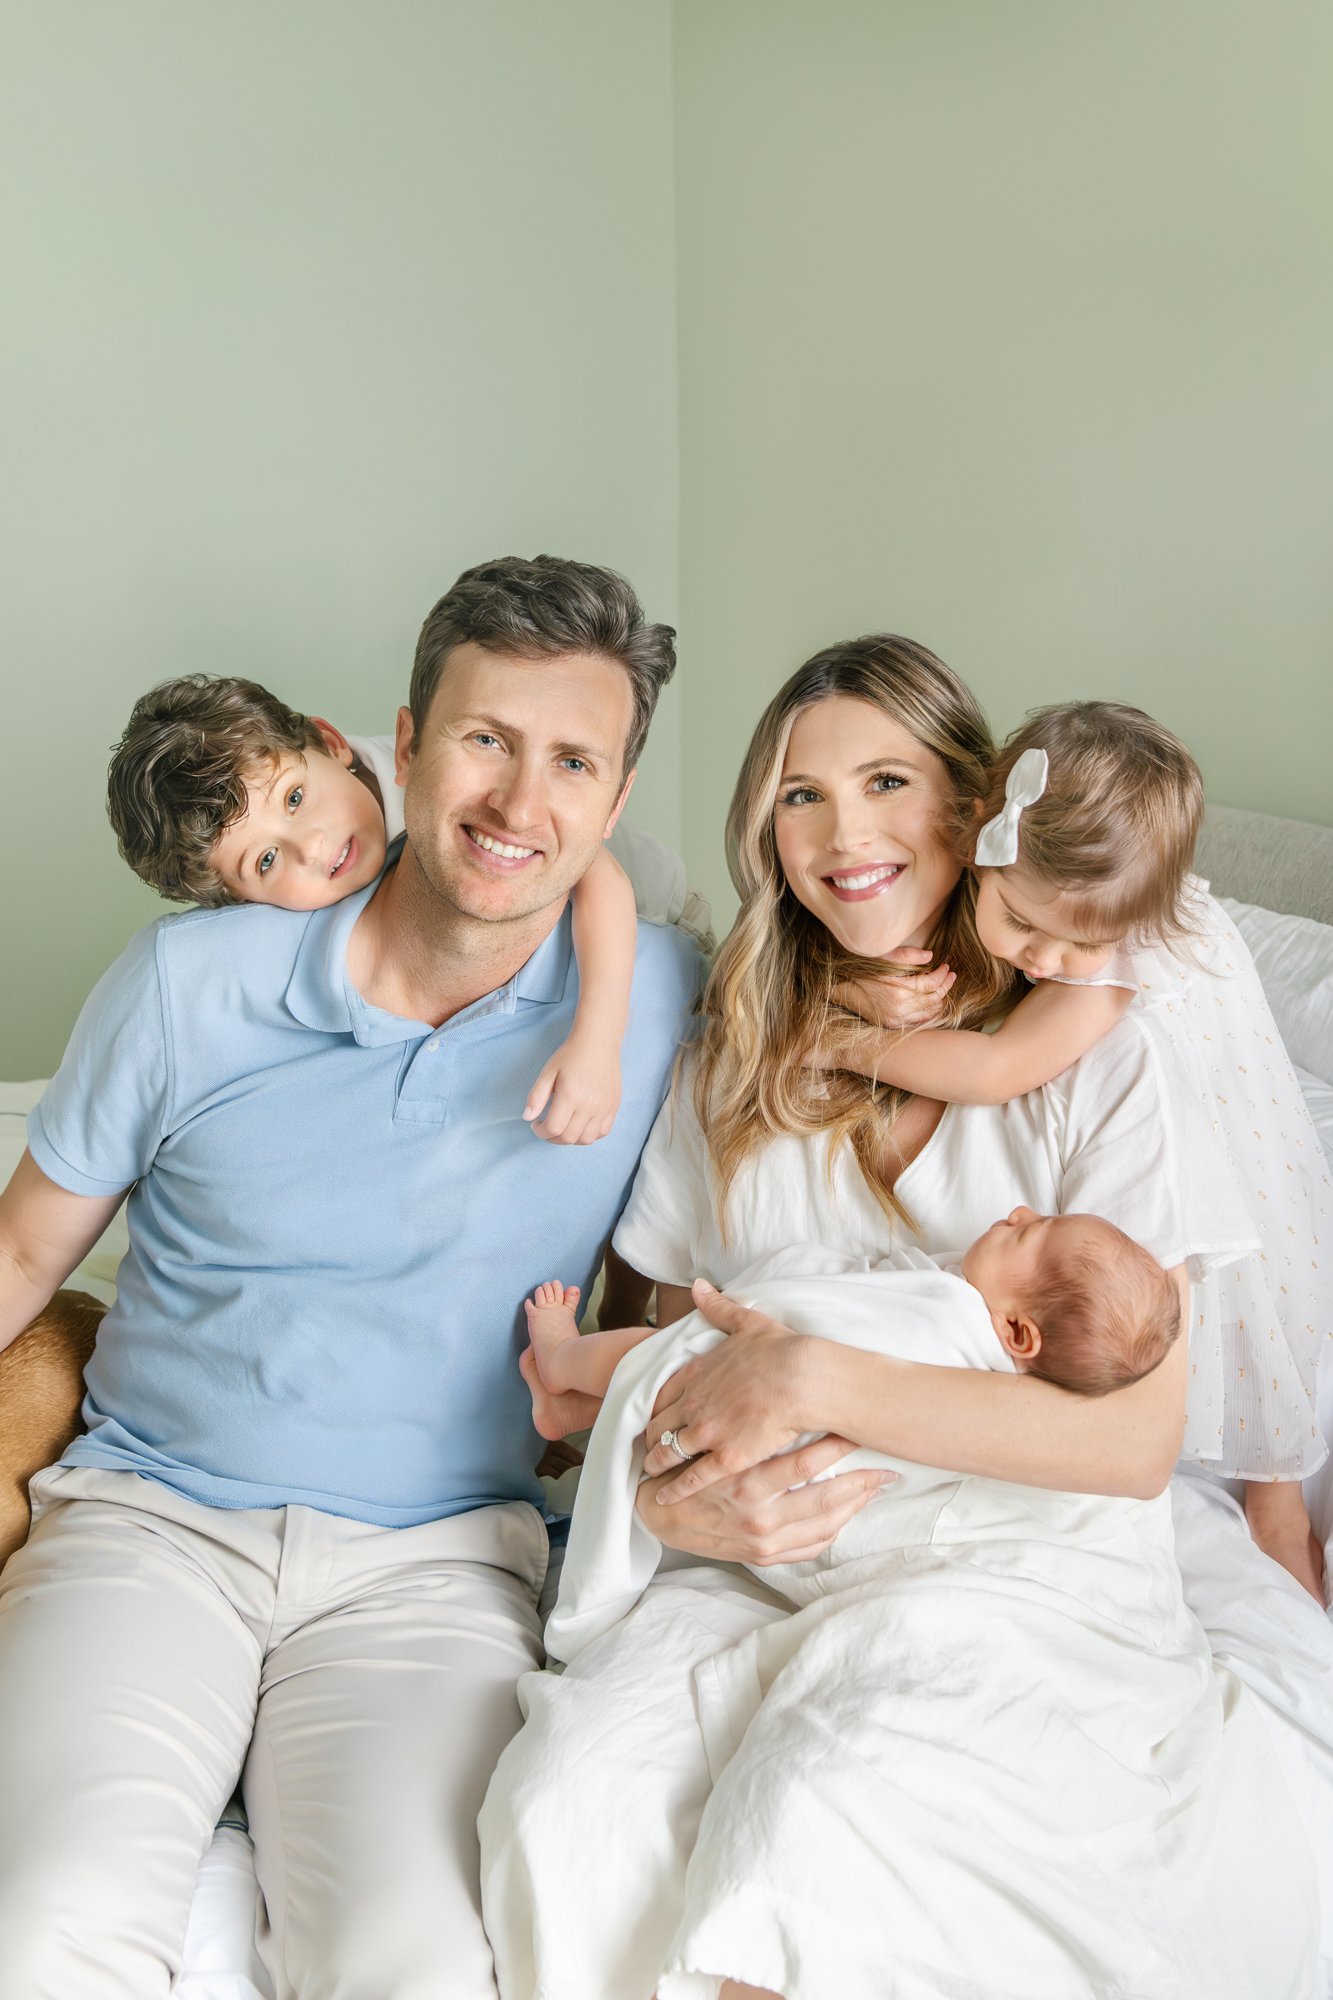  Nicole Hawkins captures a family portrait of two parents with their three children during their newborn session for their son. #candidposeinspo #newbornphotography #shorthillsphotographer #familyphotographersinnewjersey #inhomeportraits #newbornpose